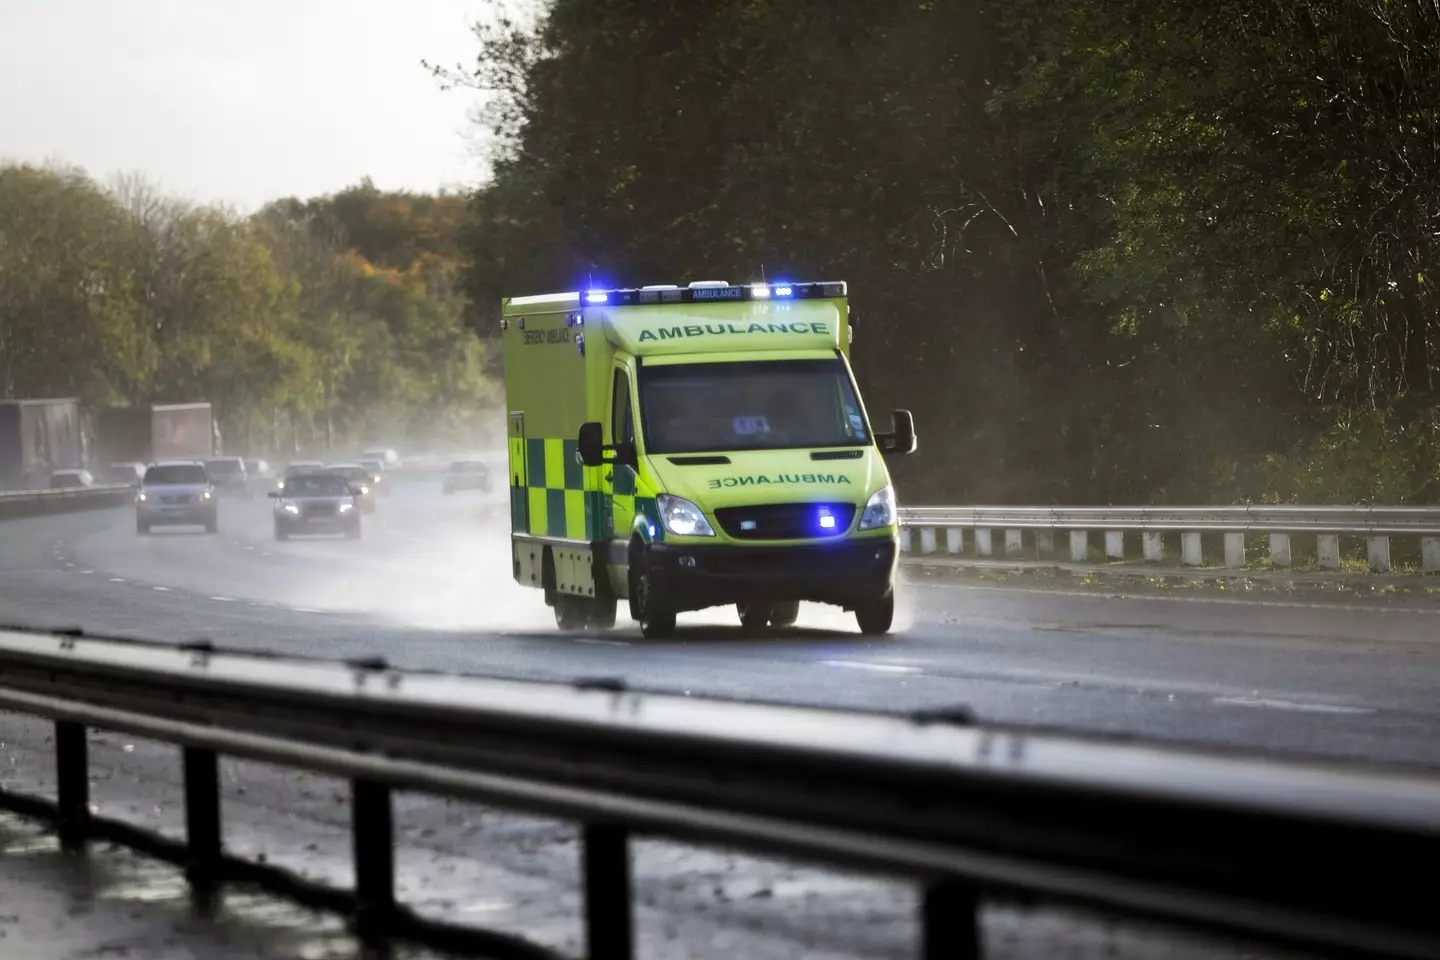 The Welsh Ambulance Service has urged people to use common sense before calling 999.